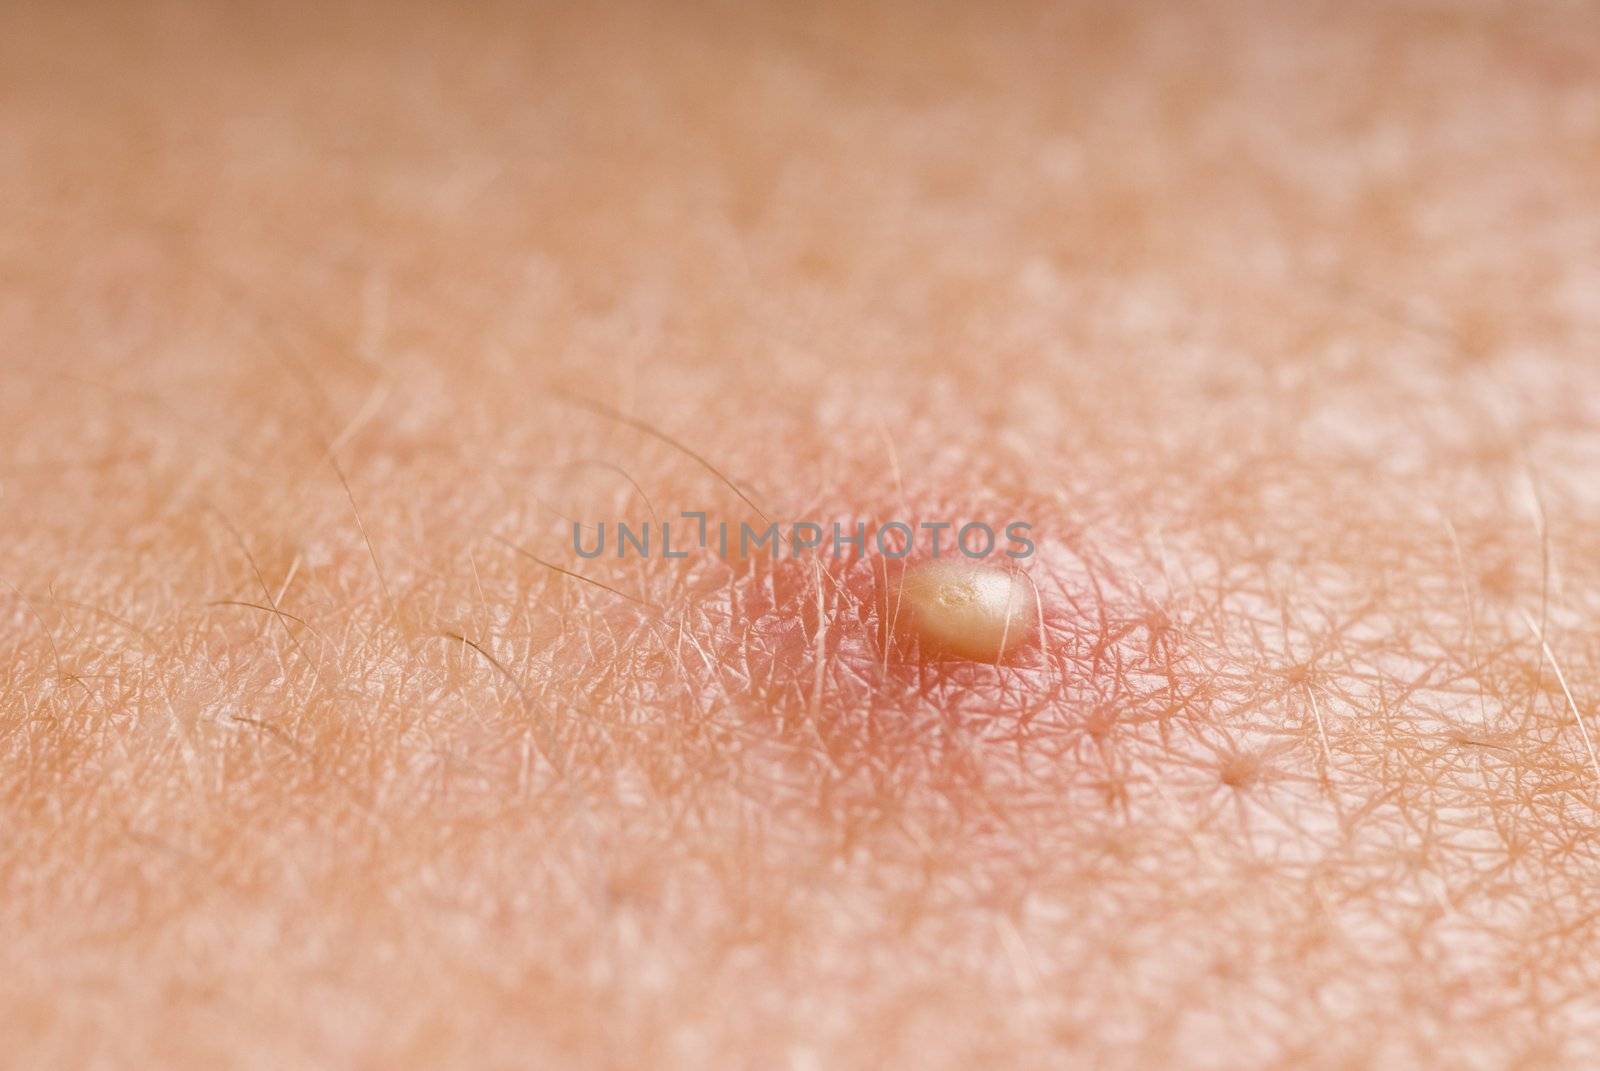 macro image of an ugly white head zit, pictured with a narrow depth of field